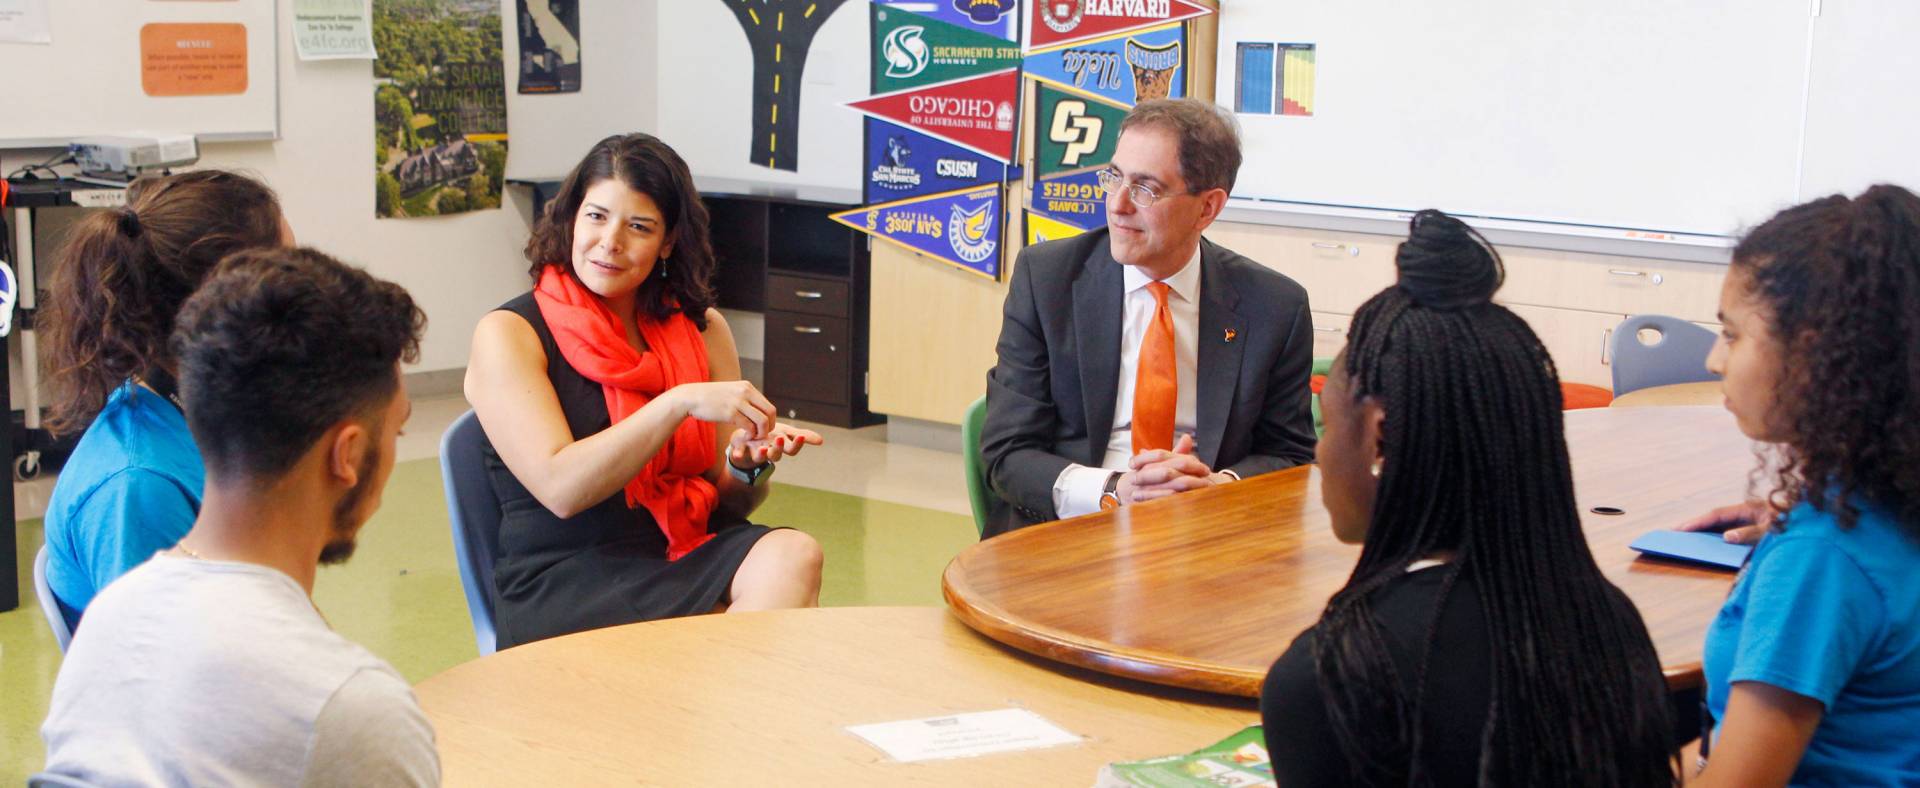 President Eisgruber and Khristina Gonzalez sit at a table, speaking with high school students